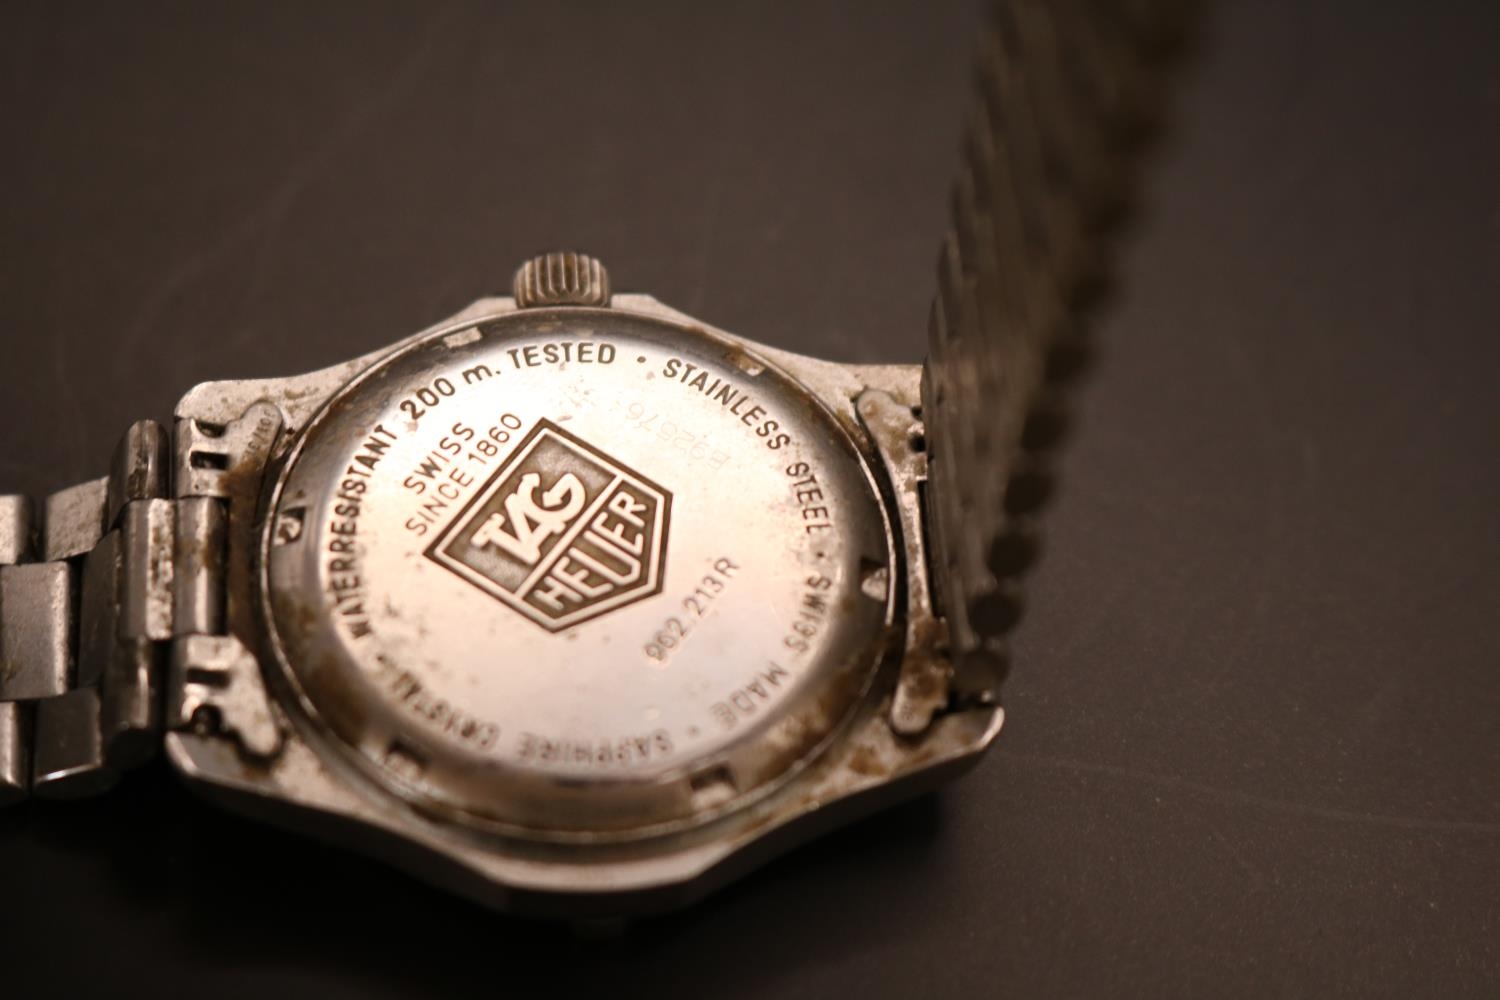 Tag Heuer Professional 200m Swiss quartz watch with date window & Silver coloured dial. 36mm case - Image 4 of 5